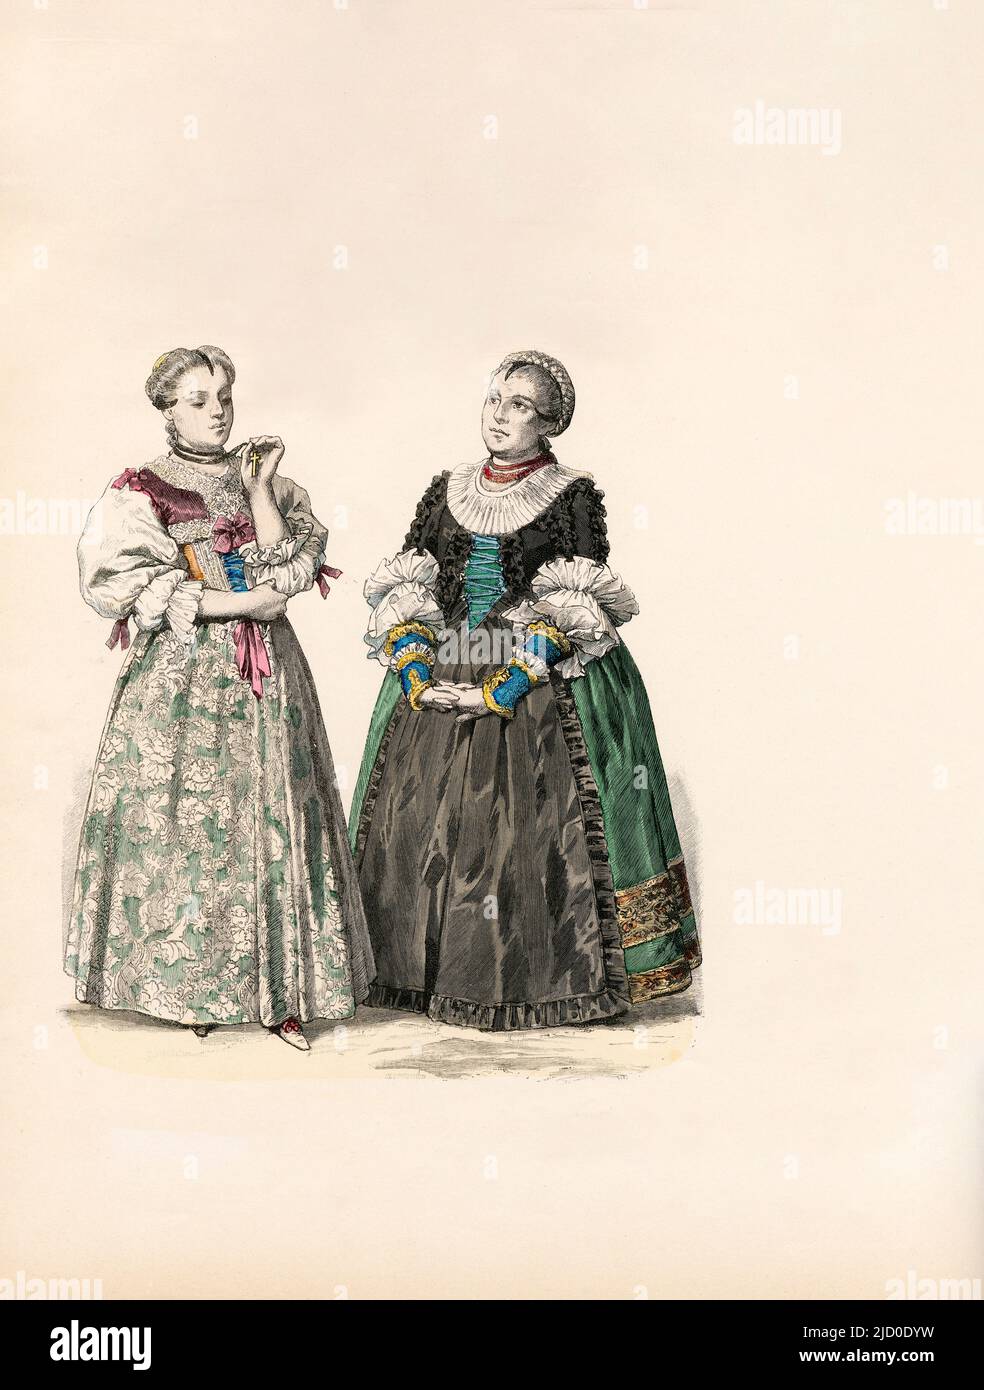 German Middle Class, Girl and Woman from Augsburg, 1770-1790, Illustration, The History of Costume, Braun & Schneider, Munich, Germany, 1861-1880 Stock Photo